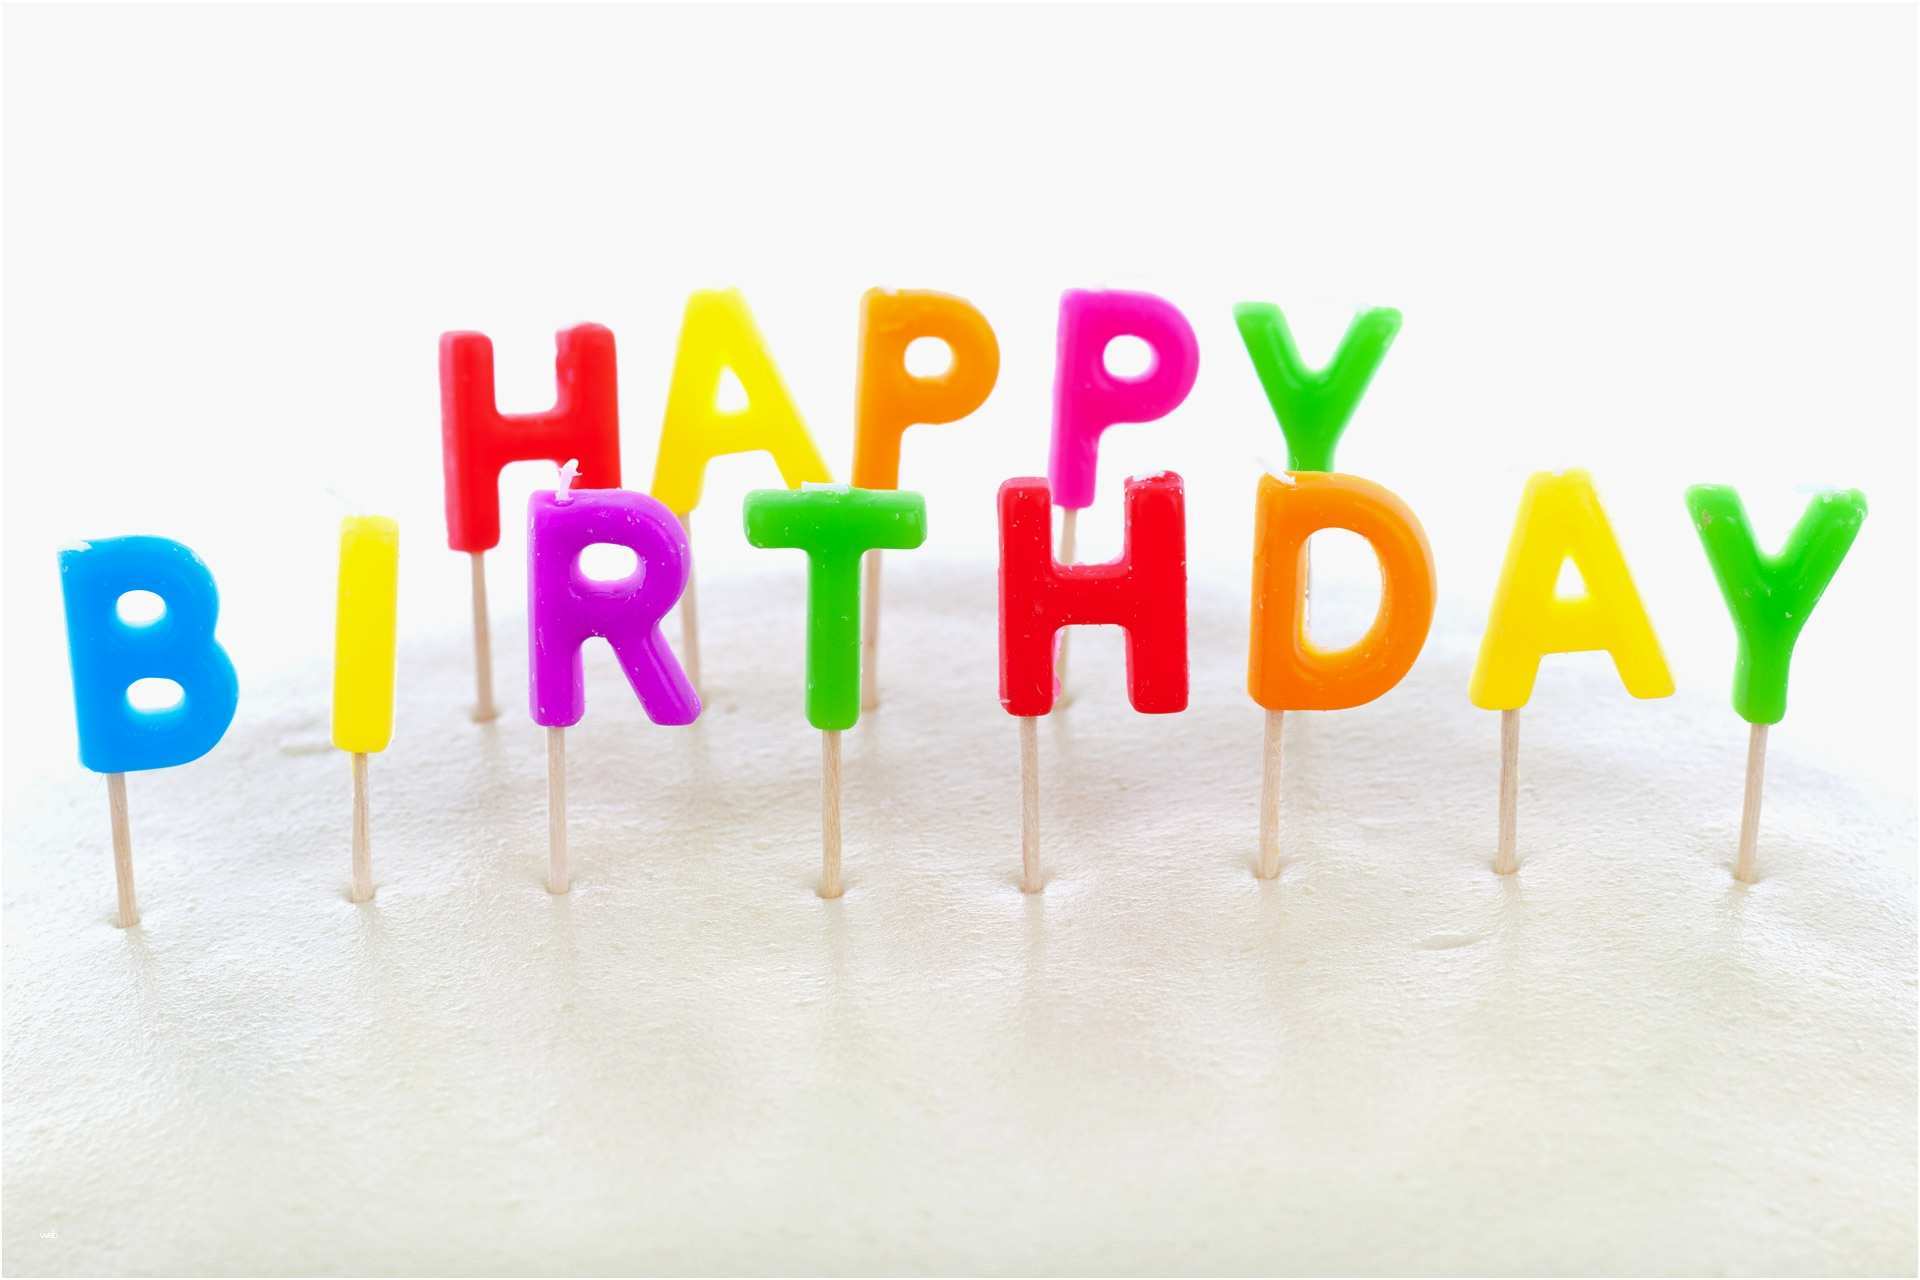 Happy Birthday Song Background Music Free Download - Happy Birthday ...